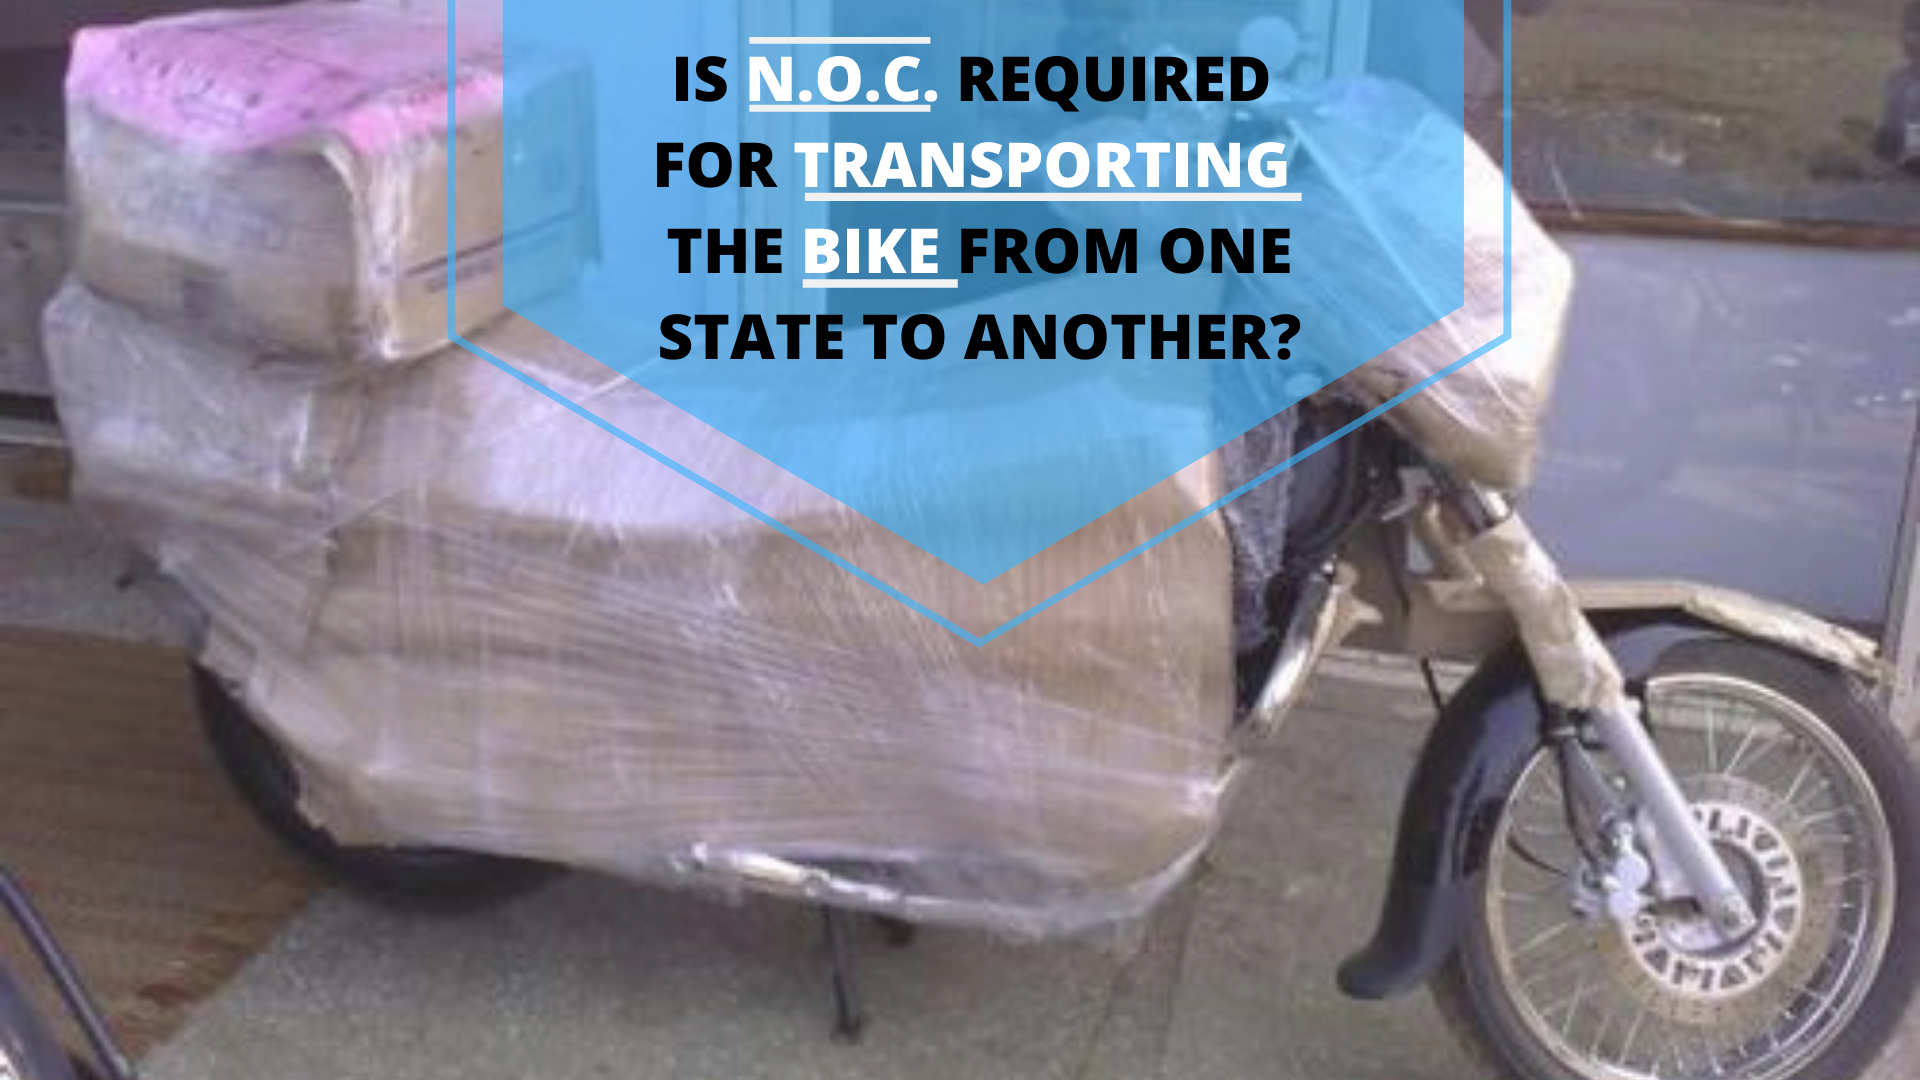 Is N.O.C. Required for Transporting the Bike from one State to Another?